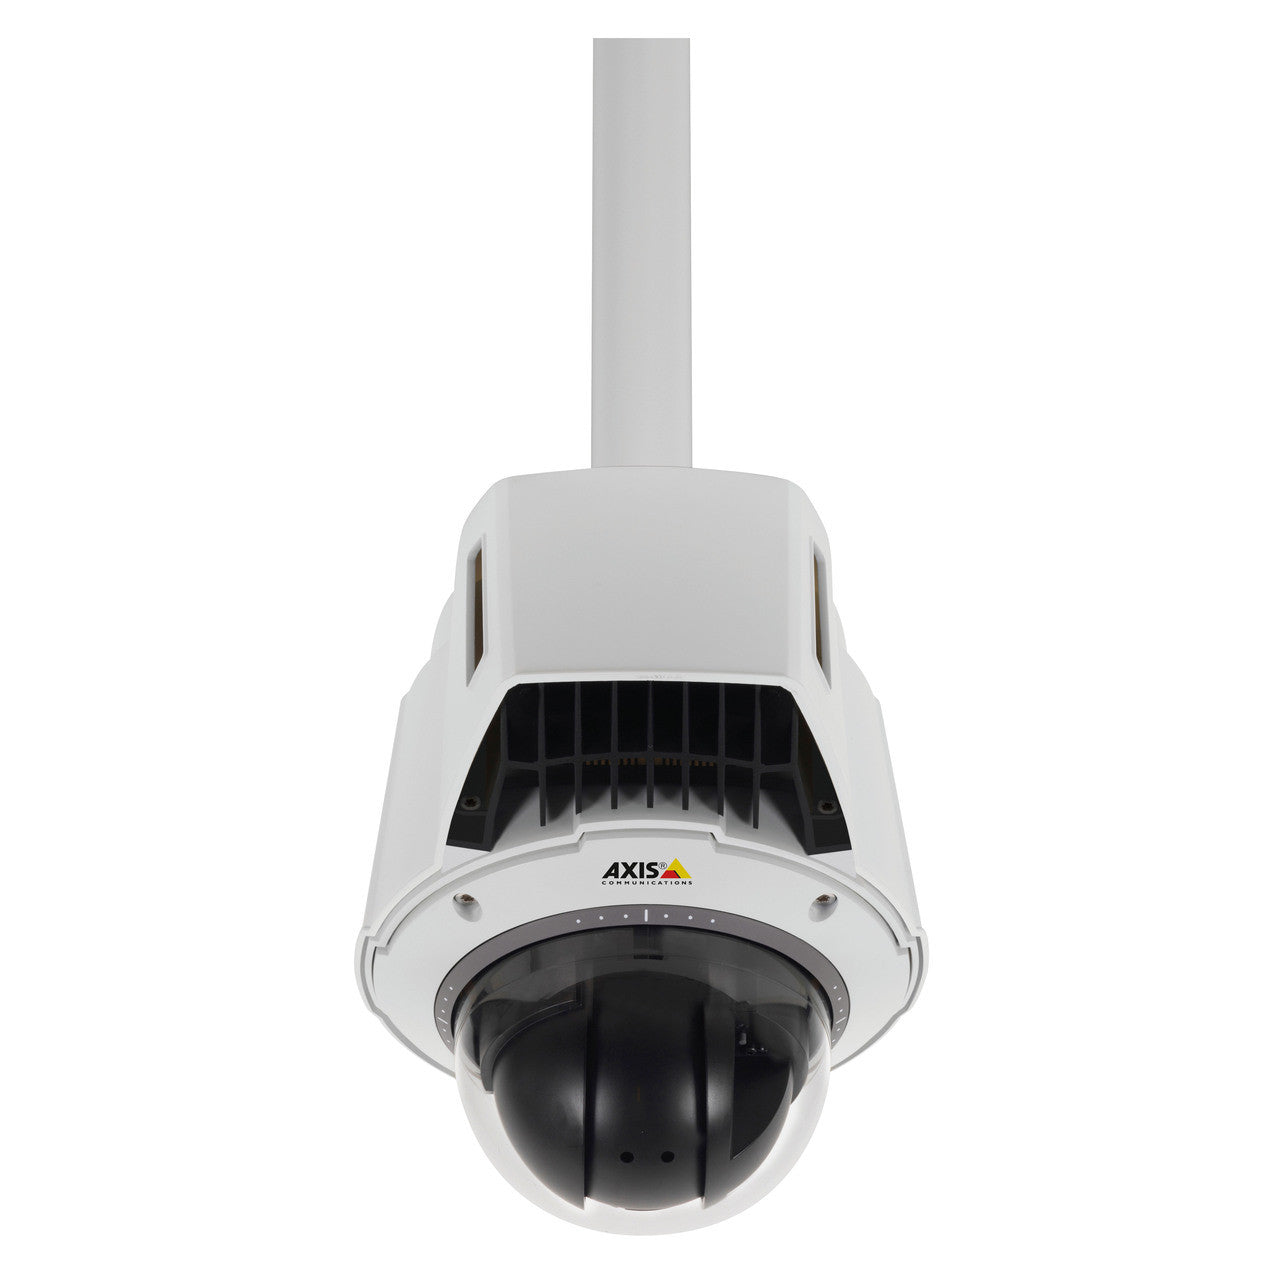 AXIS Q6045-C rear with optional T91A63 Ceiling Bracket